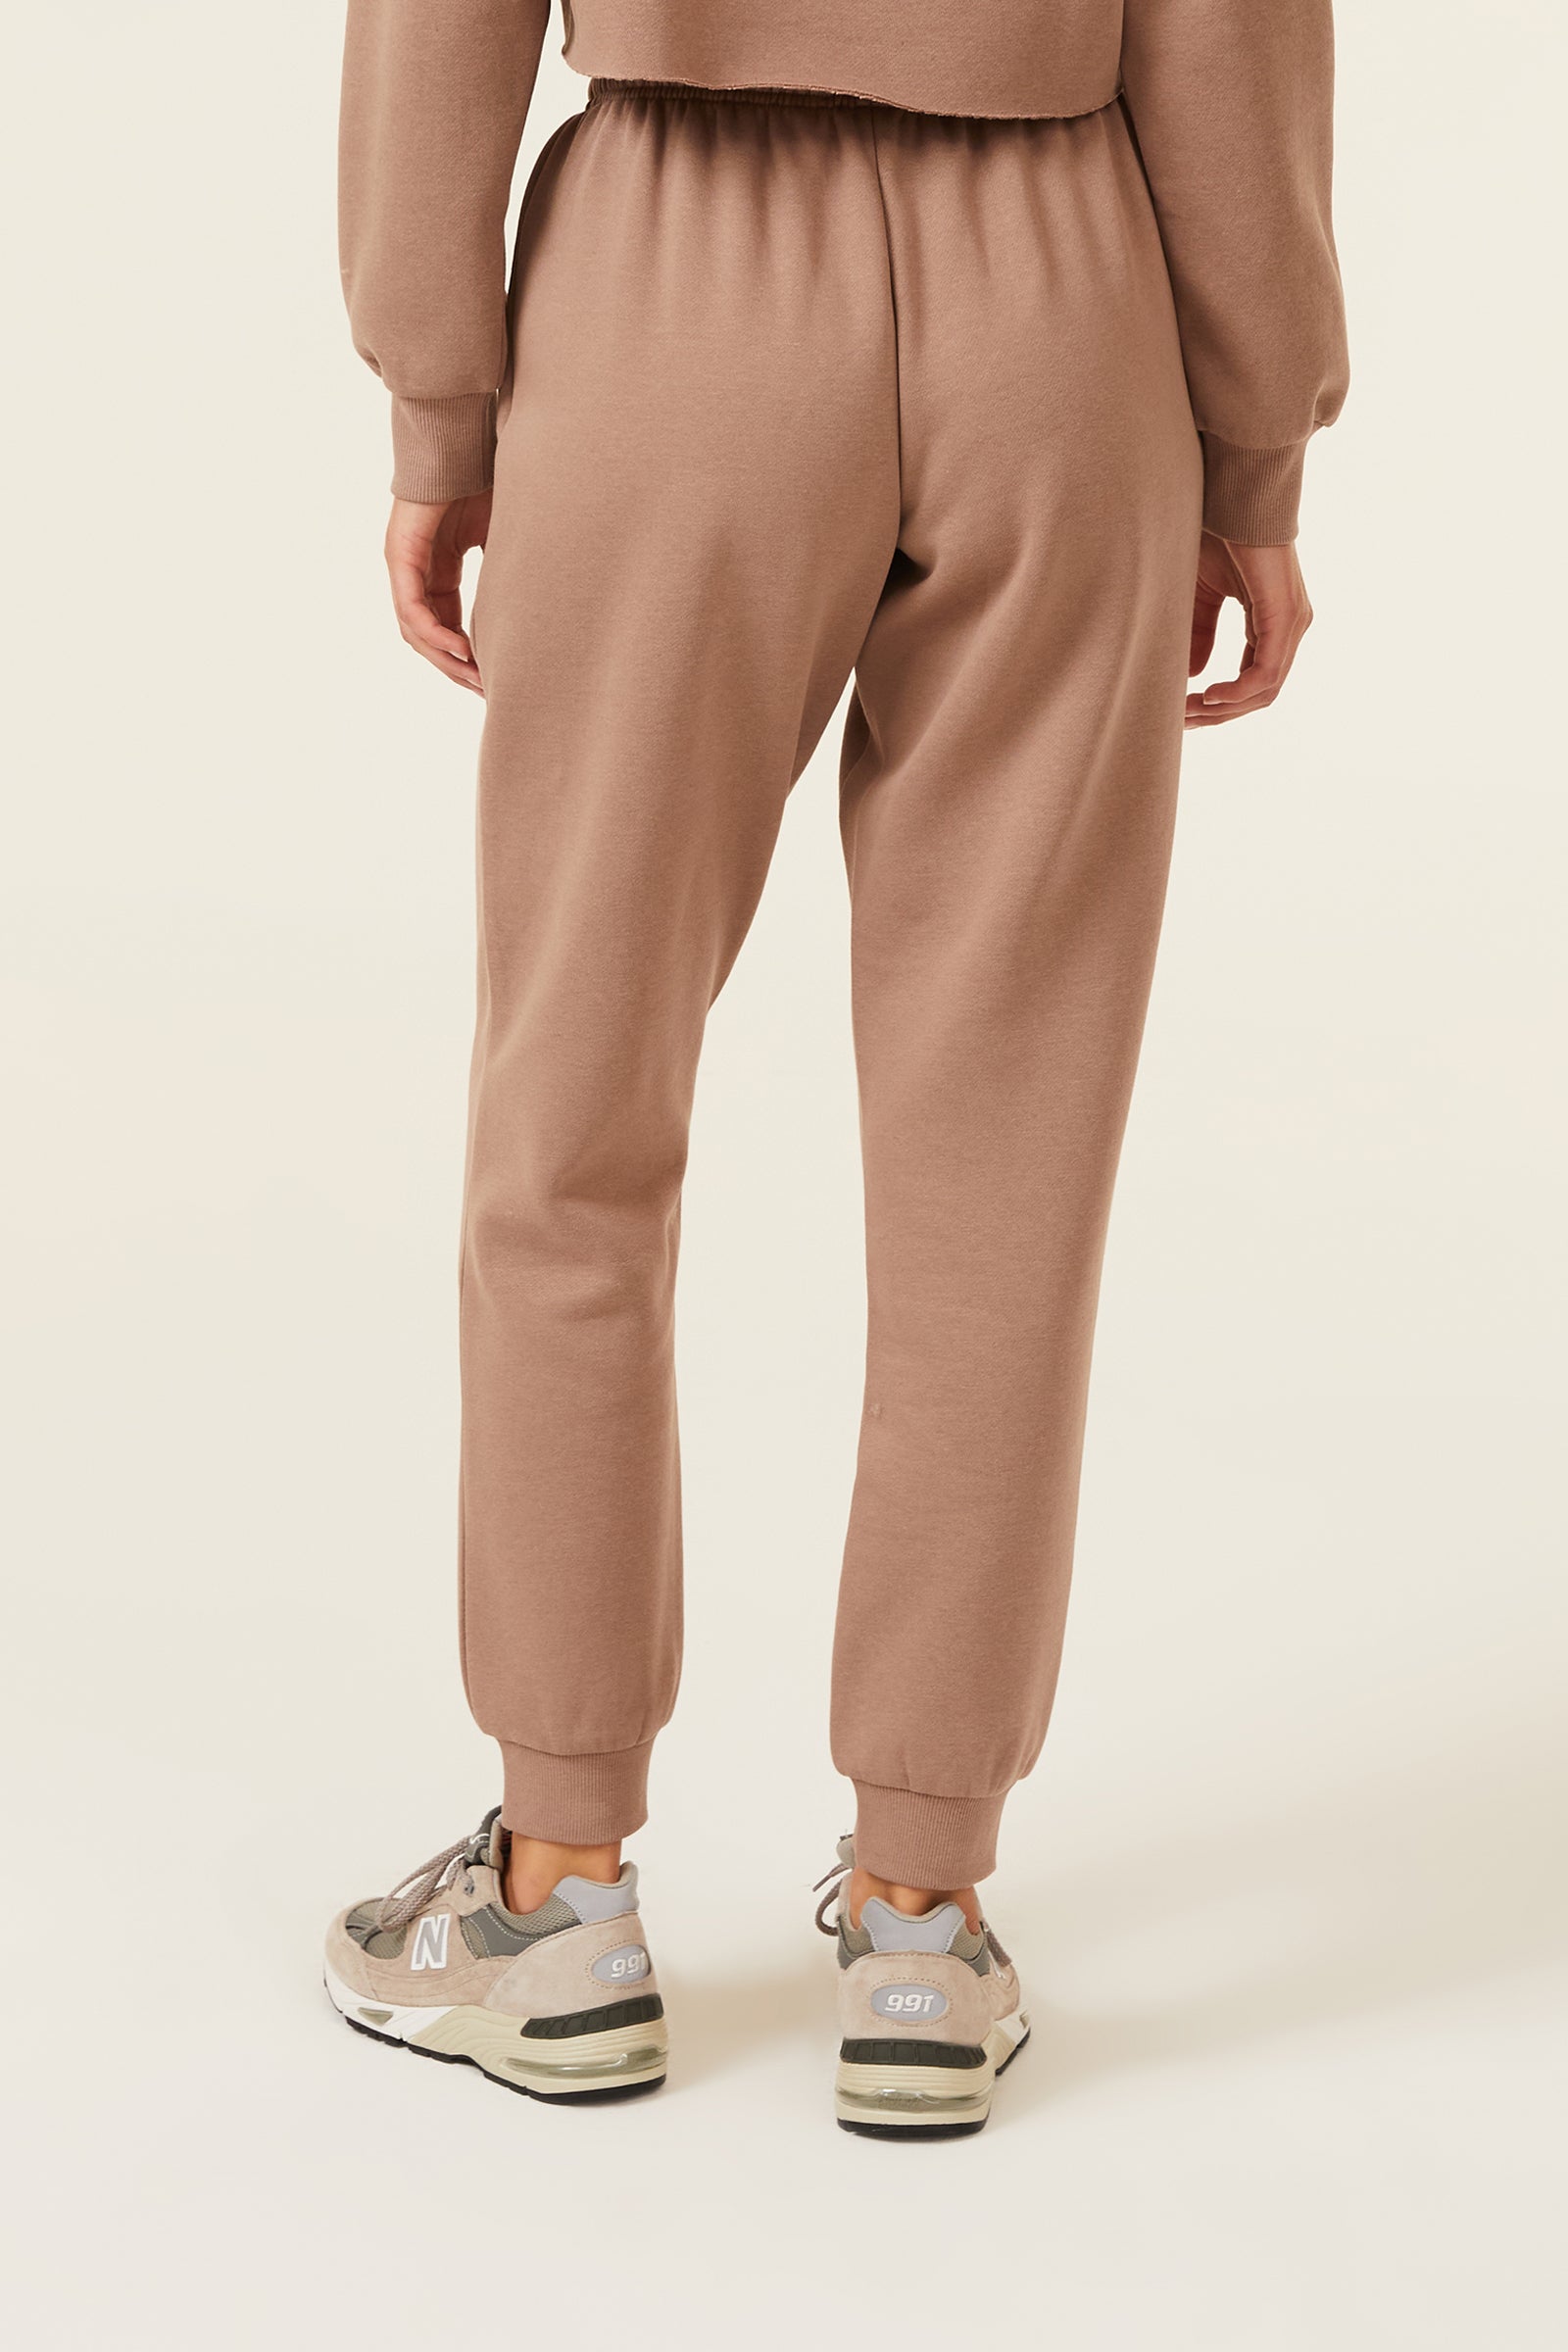 Nude Lucy Carter Classic Trackpant in a Brown Carob Colour